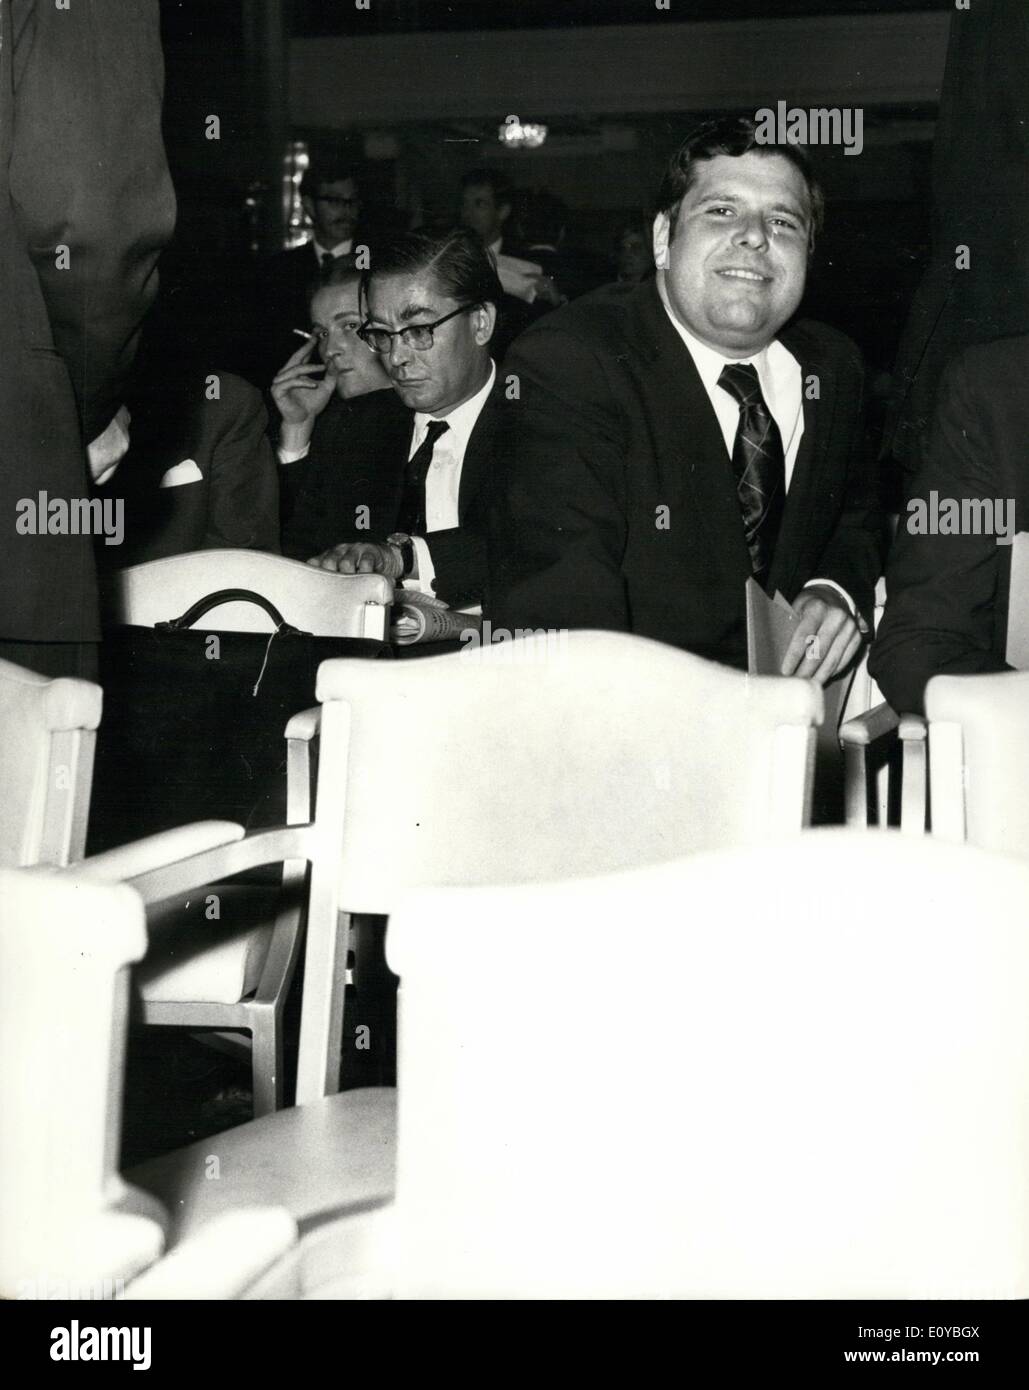 Oct. 10, 1969 - Uproar At Meeting Of Pergamon Press Shareholders At The Connaught Rooms: As Mr. Robert Maxwell, Labour MP and Chairman of Pergamon Press was about to open the meeting of Shareholders who were their to decide whether Mr. Saul Steinberg's Leasee team should take over management control of Pergamon from Mr. Maxwell, four men jump up onto the Platform and one of them solicitor, tried to speak to the meeting. After a few minutes he left the platform as the microphones went dead and the shareholders were chanting and hand with his three colleagues. Photo shows Mr Stock Photo